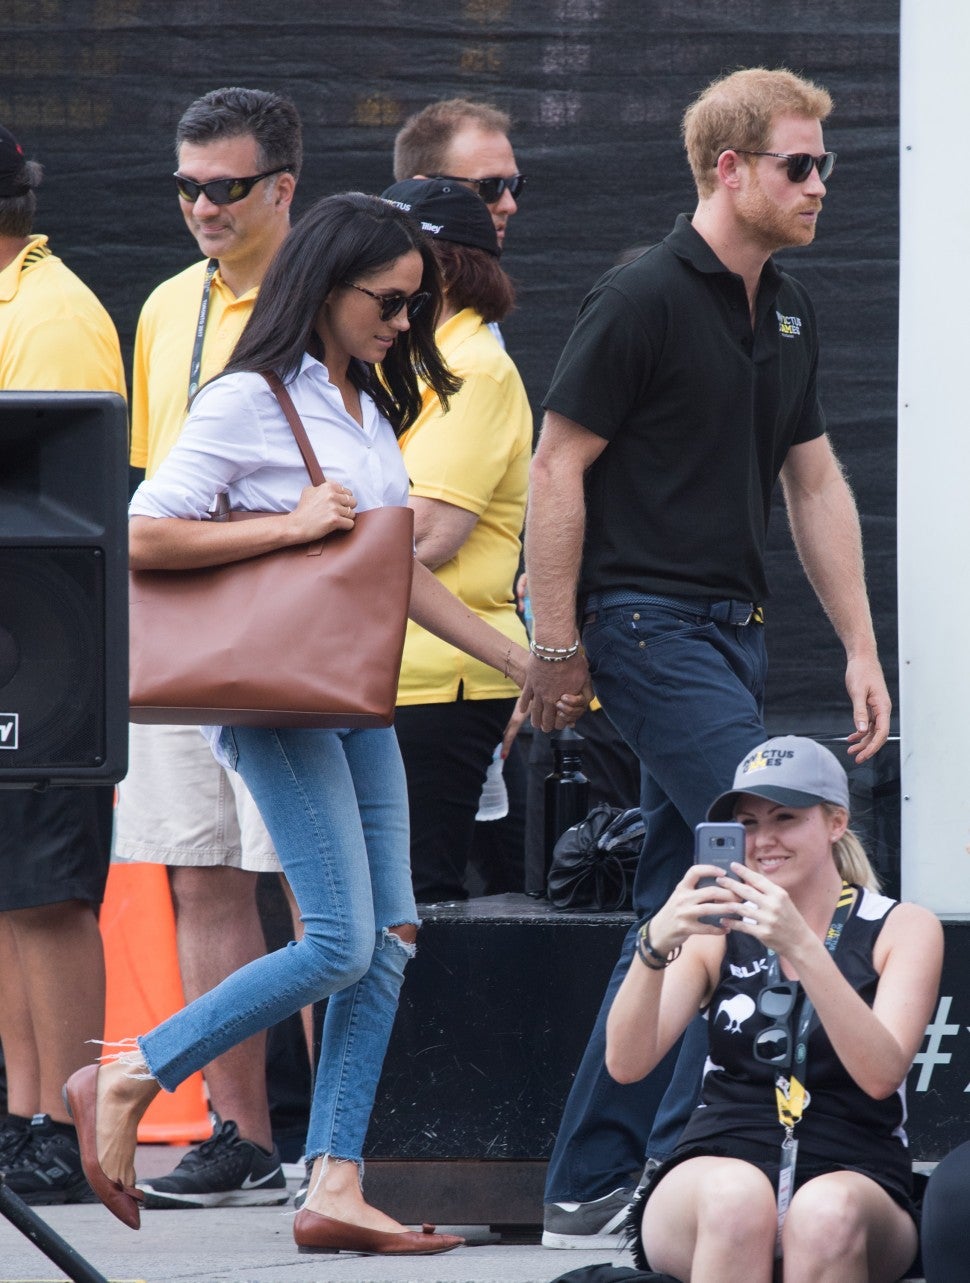 Meghan Markle at Invictus Games 2017